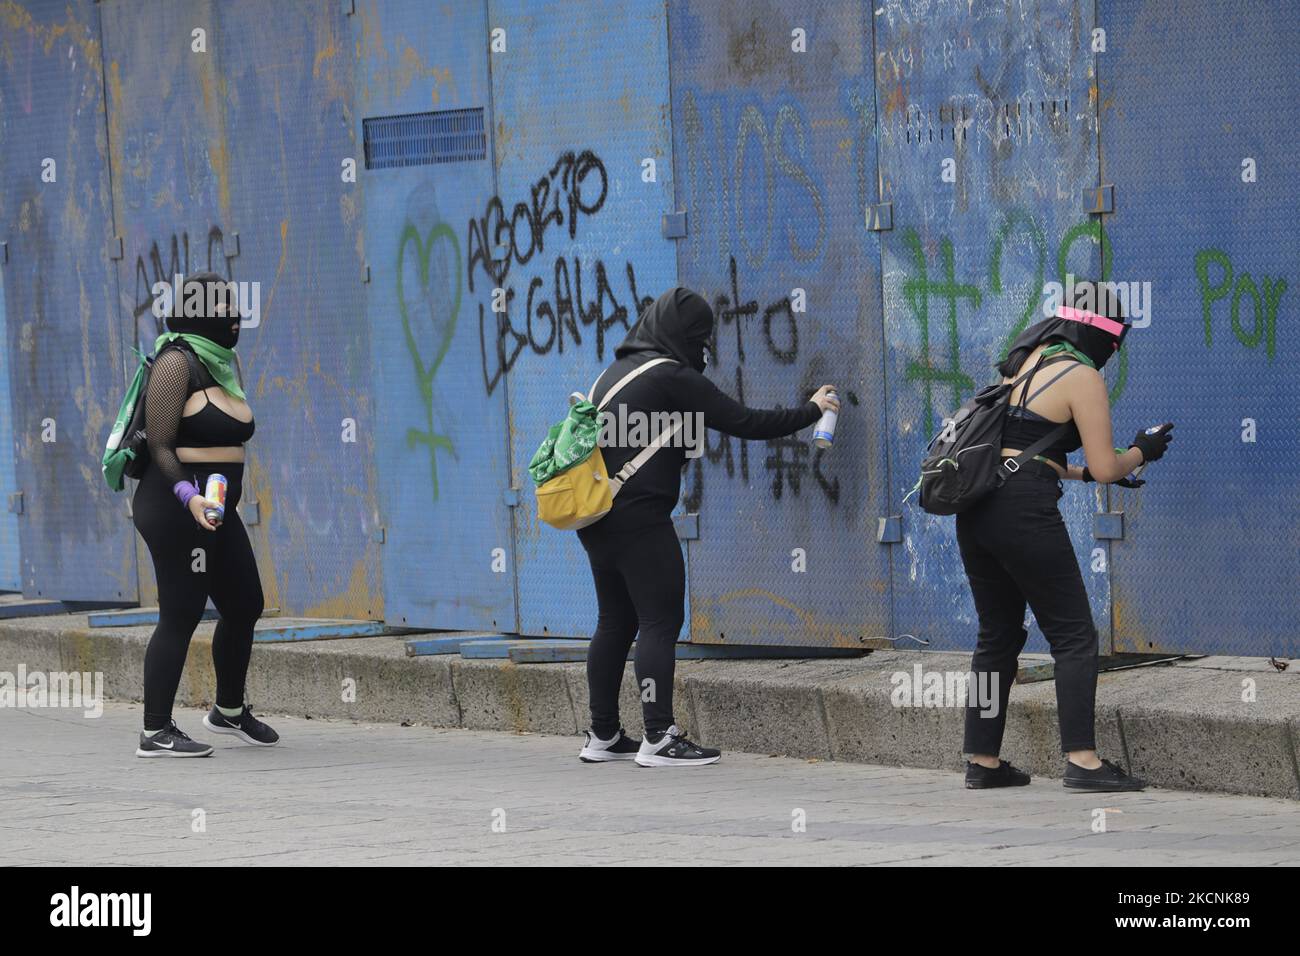 A group of women from the Black Bloc painted on fences under the Angel of Independence in Mexico City, on the occasion of the Global Day of Action in favour of legal, free and safe abortion in Mexico and Latin America. During the march, there were clashes between demonstrators and police along the route. (Photo by Gerardo Vieyra/NurPhoto) Stock Photo